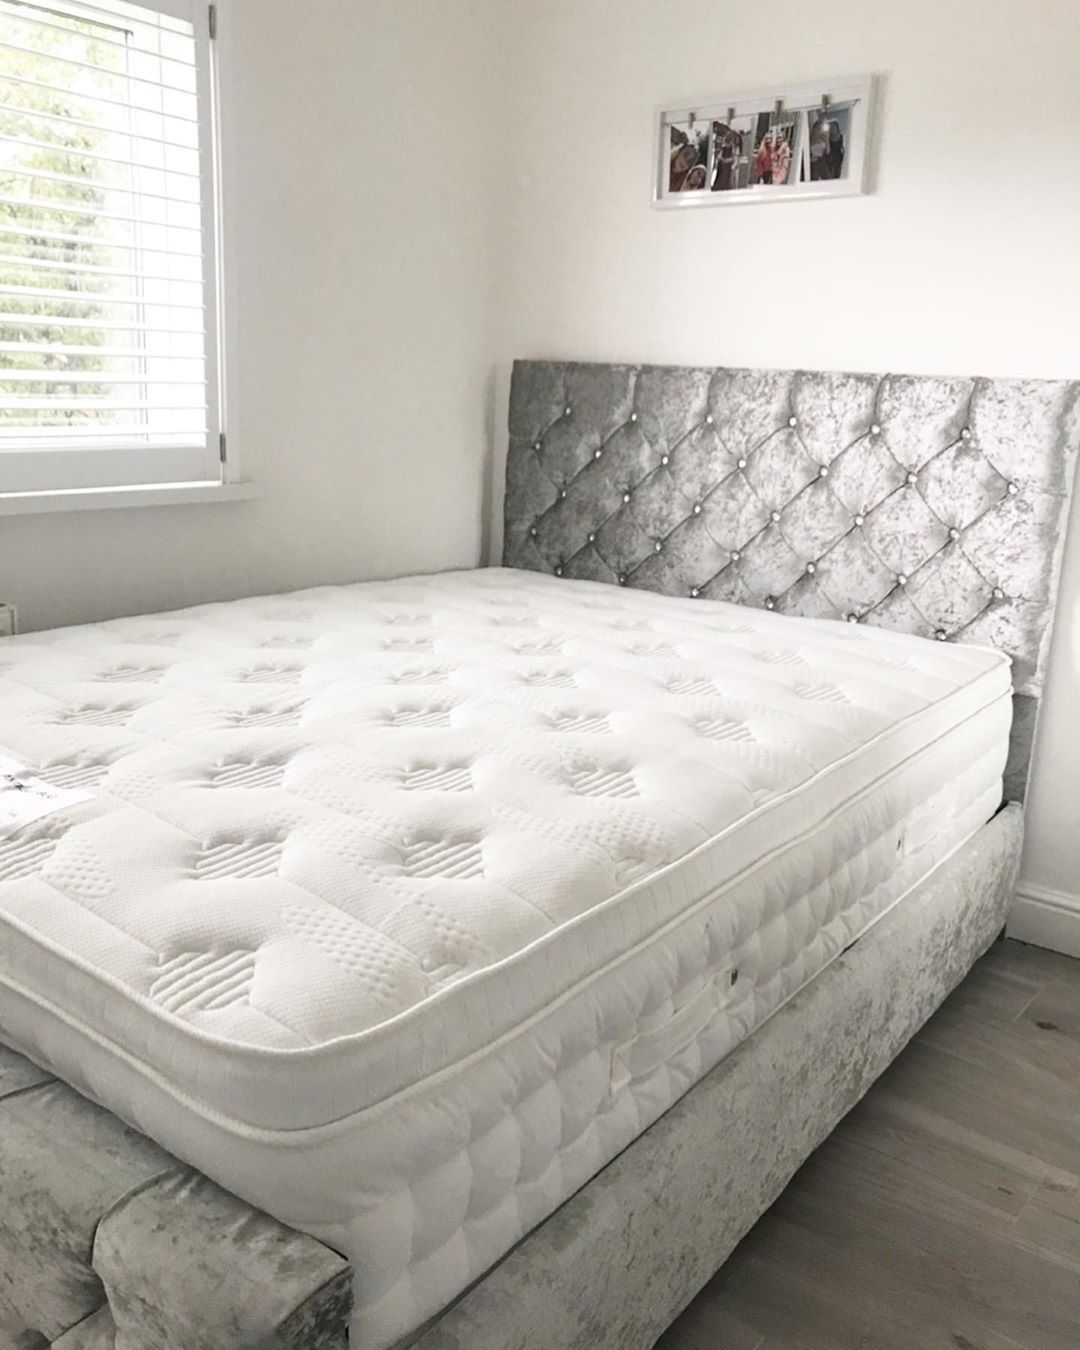 Your Happy Beds This Month - Mattress | Happy Beds - Happy Beds Blog |  Sleep and Inspiration | Happy Beds